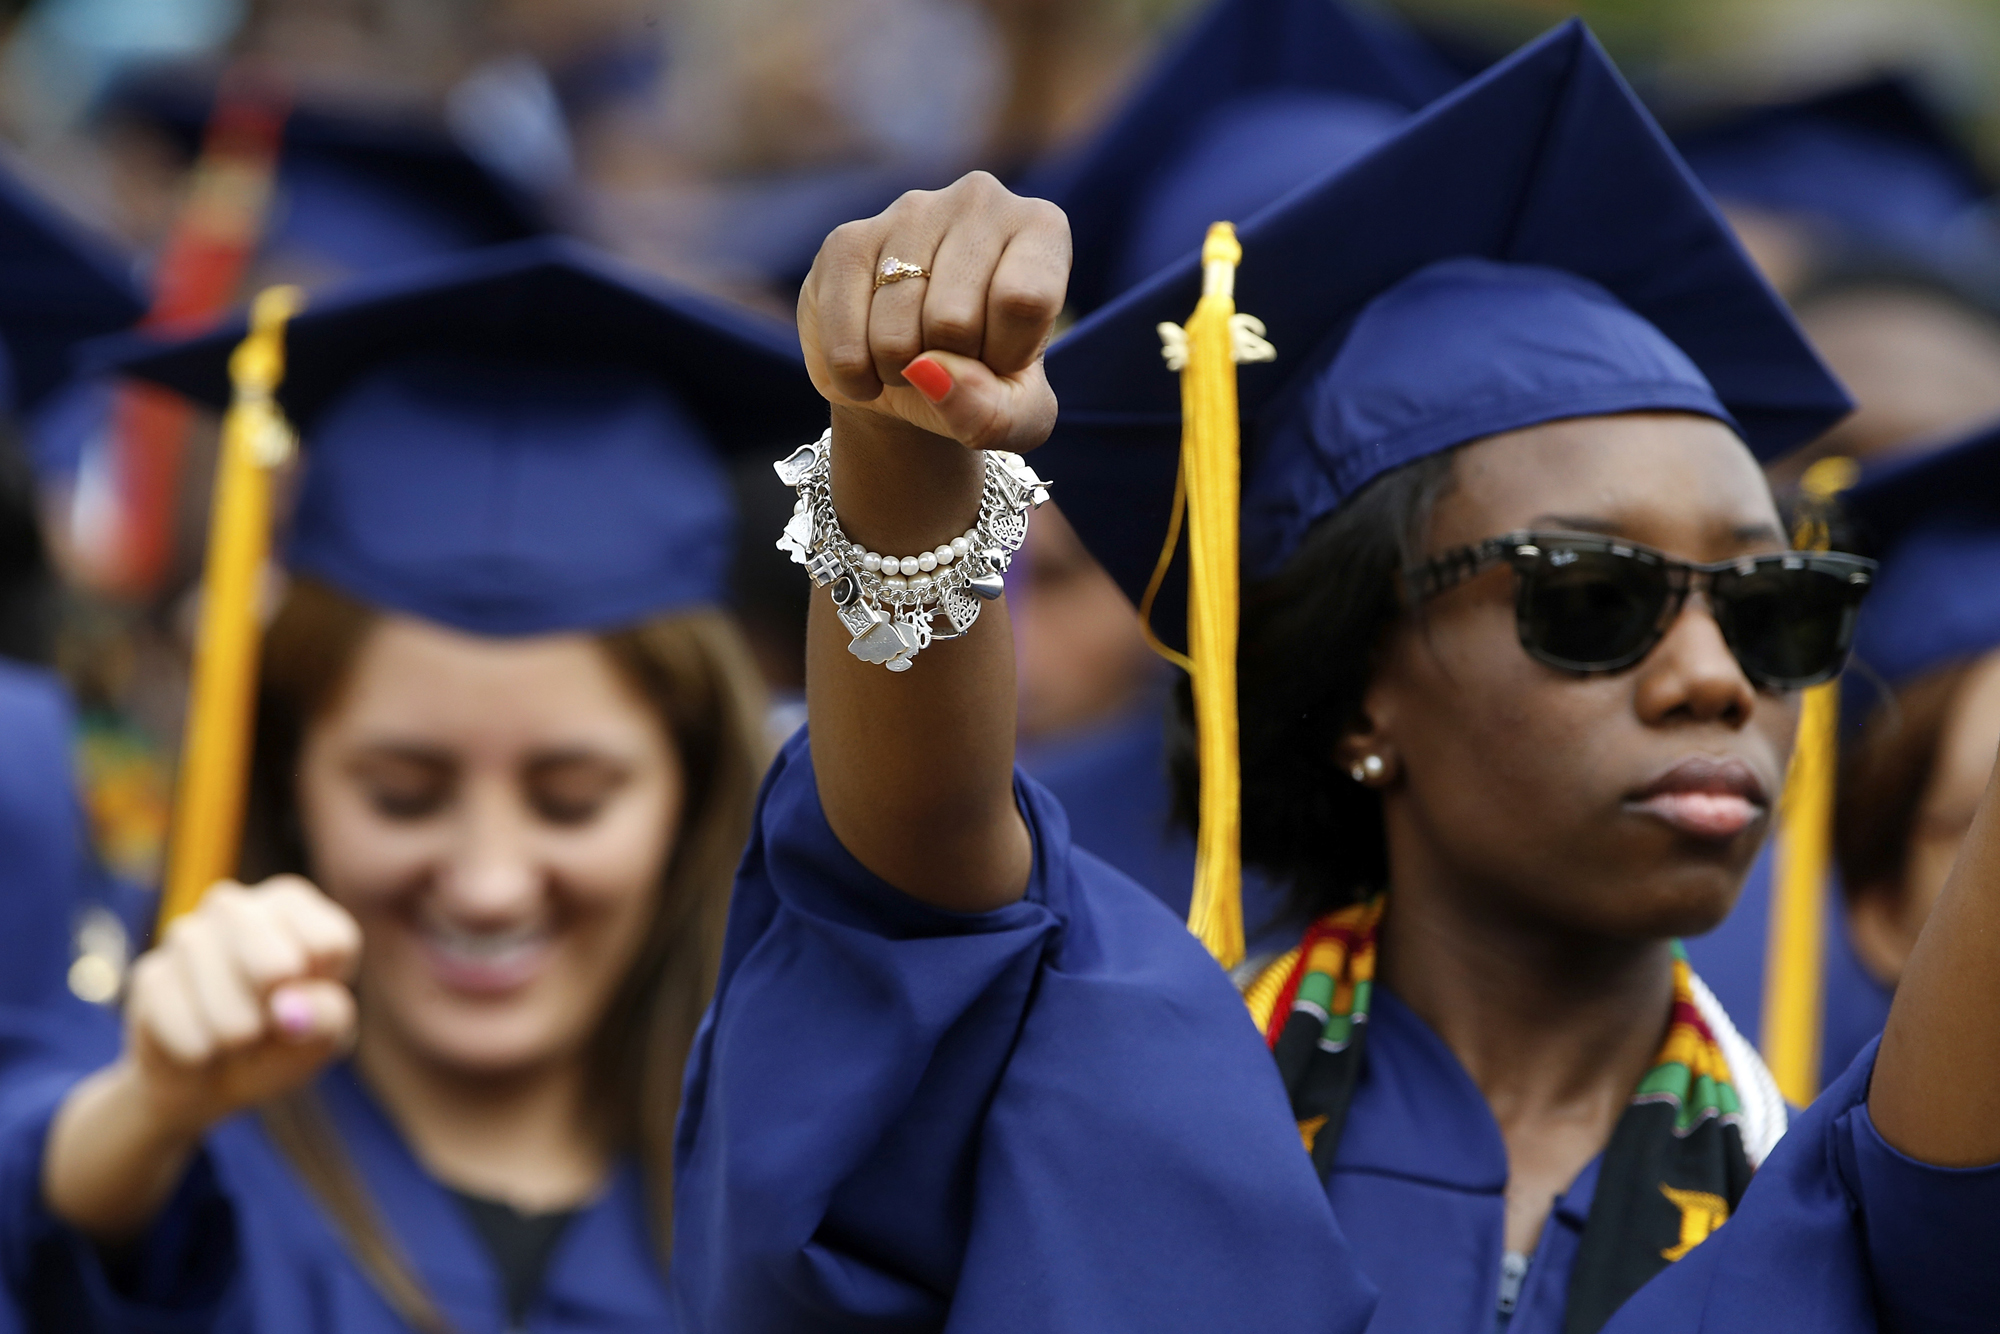 Graduates stand for the anthem "Lift Every Voice and Sing" during 2014 commencement ceremonies at Howard University in Washington May 10, 2014.